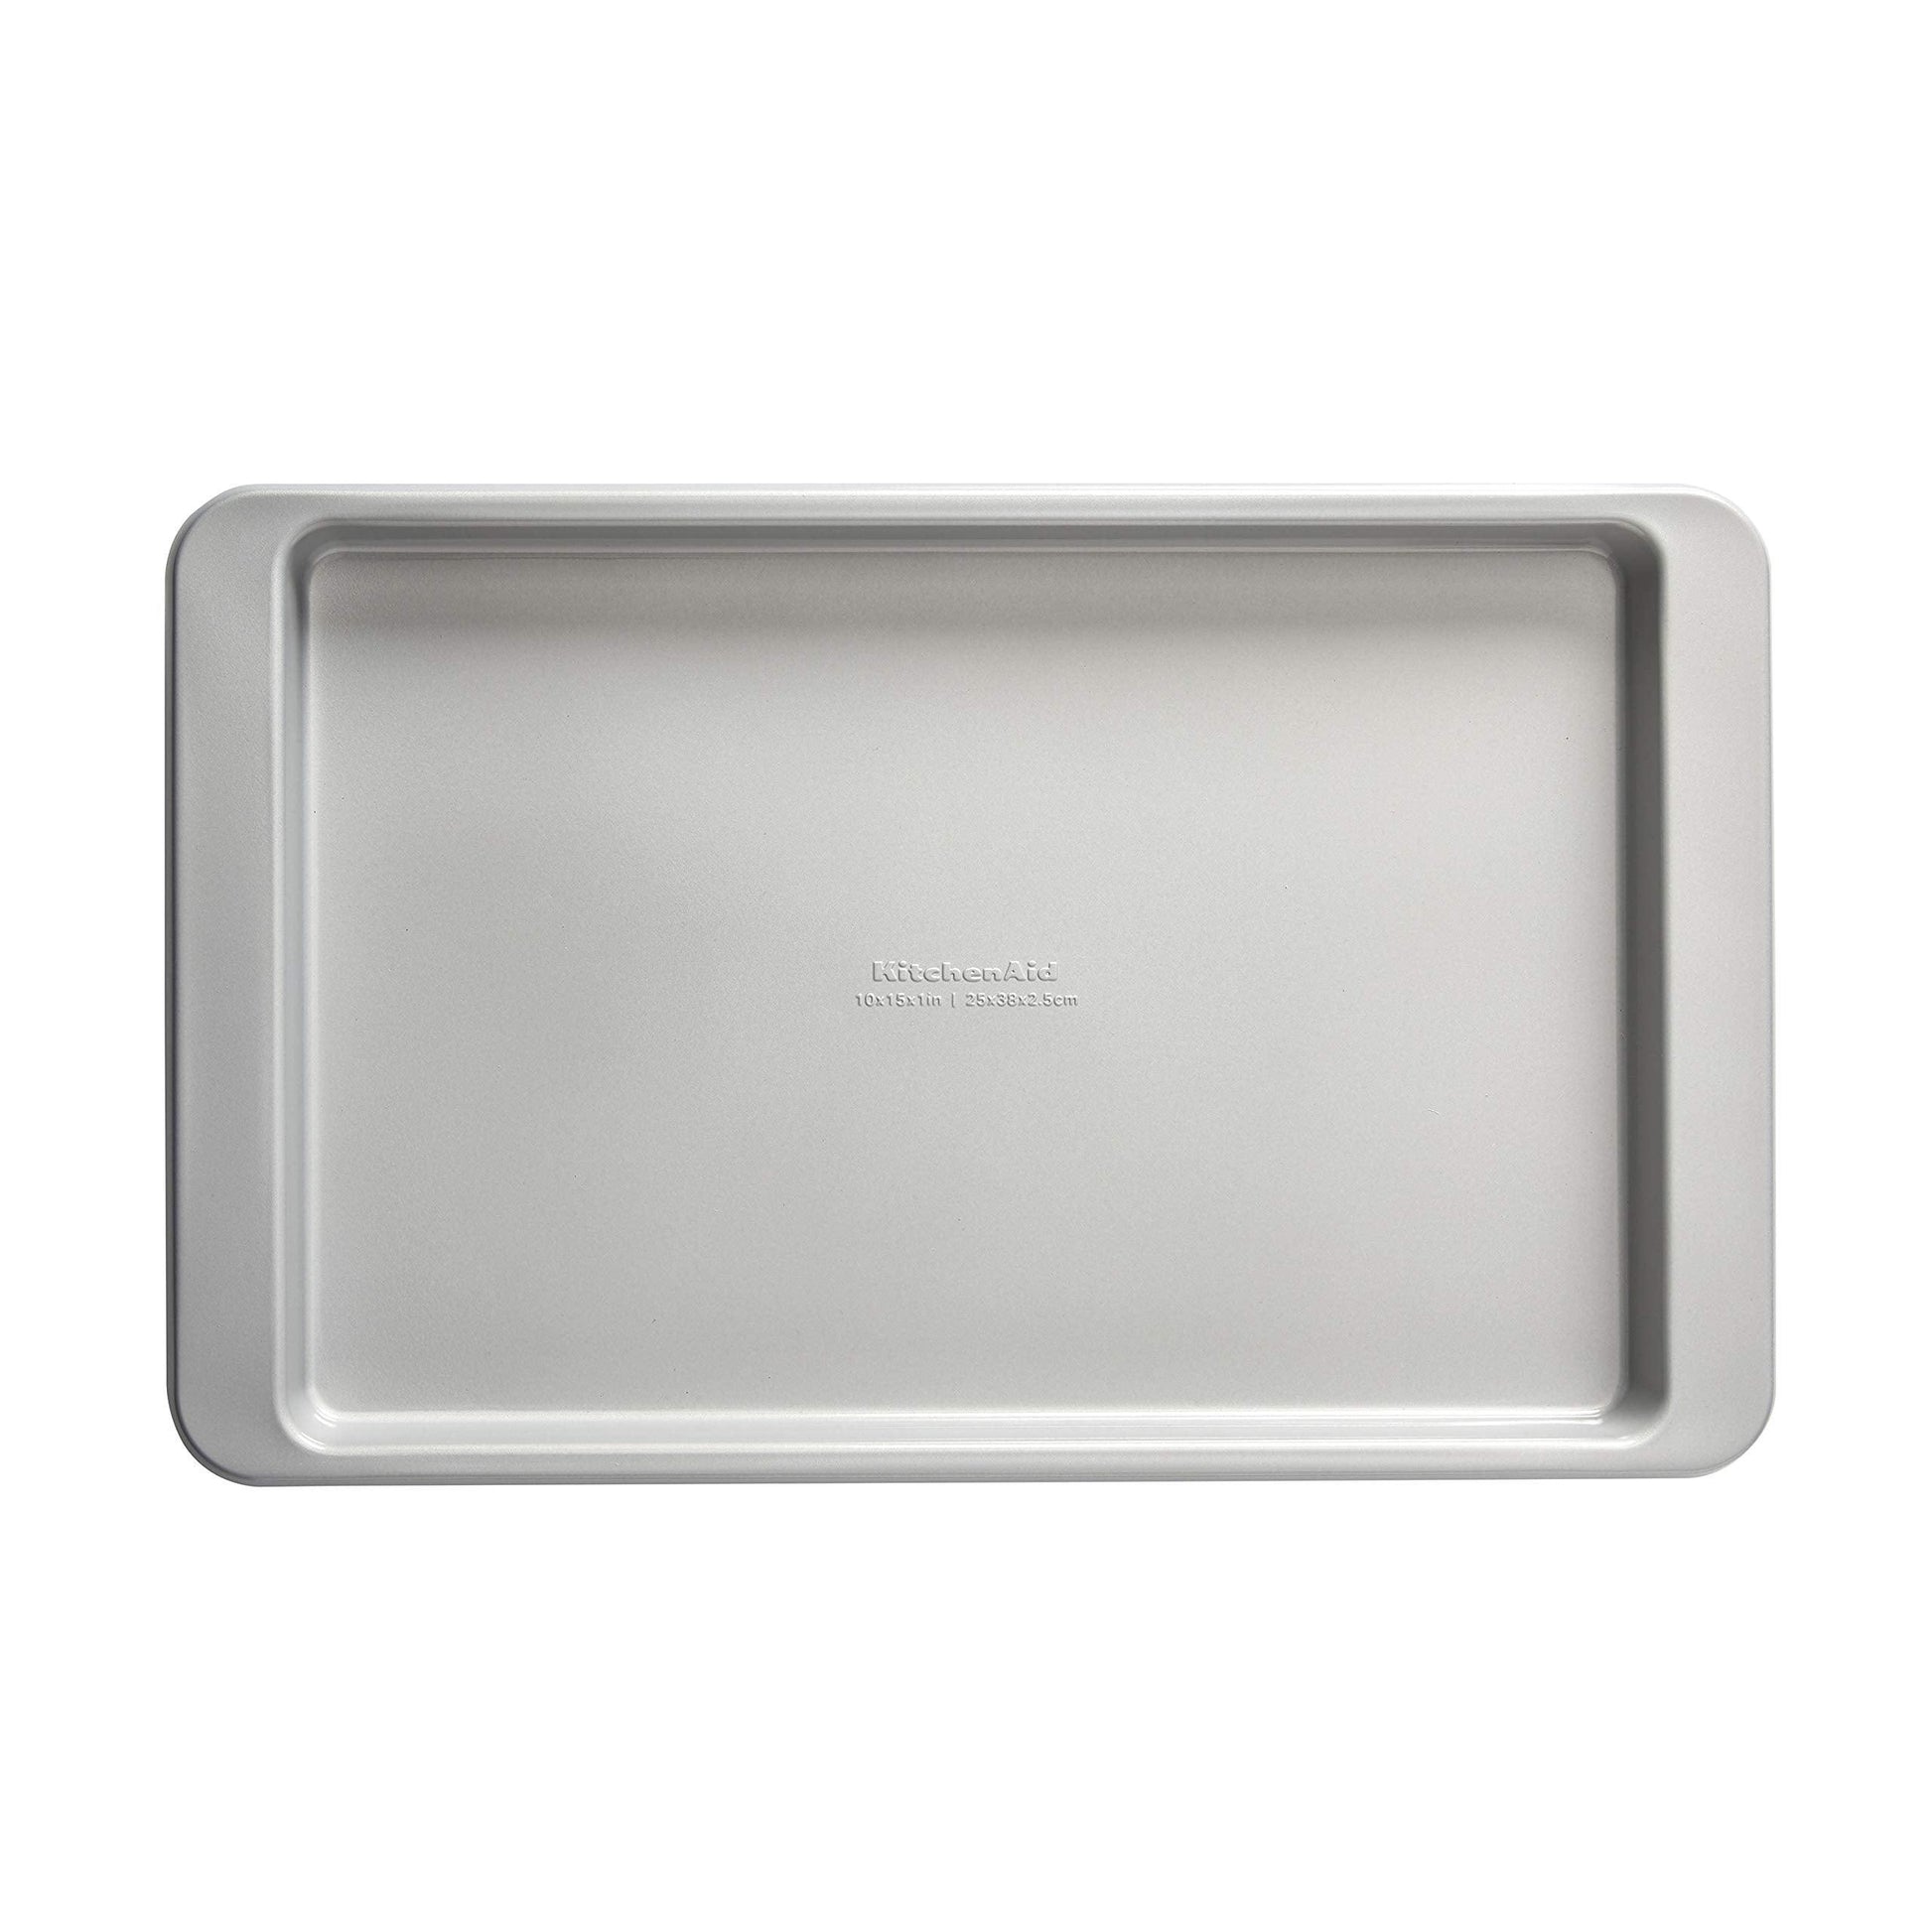 KitchenAid Nonstick Aluminized Steel Baking Sheet, 10x15-Inch, Silver - CookCave